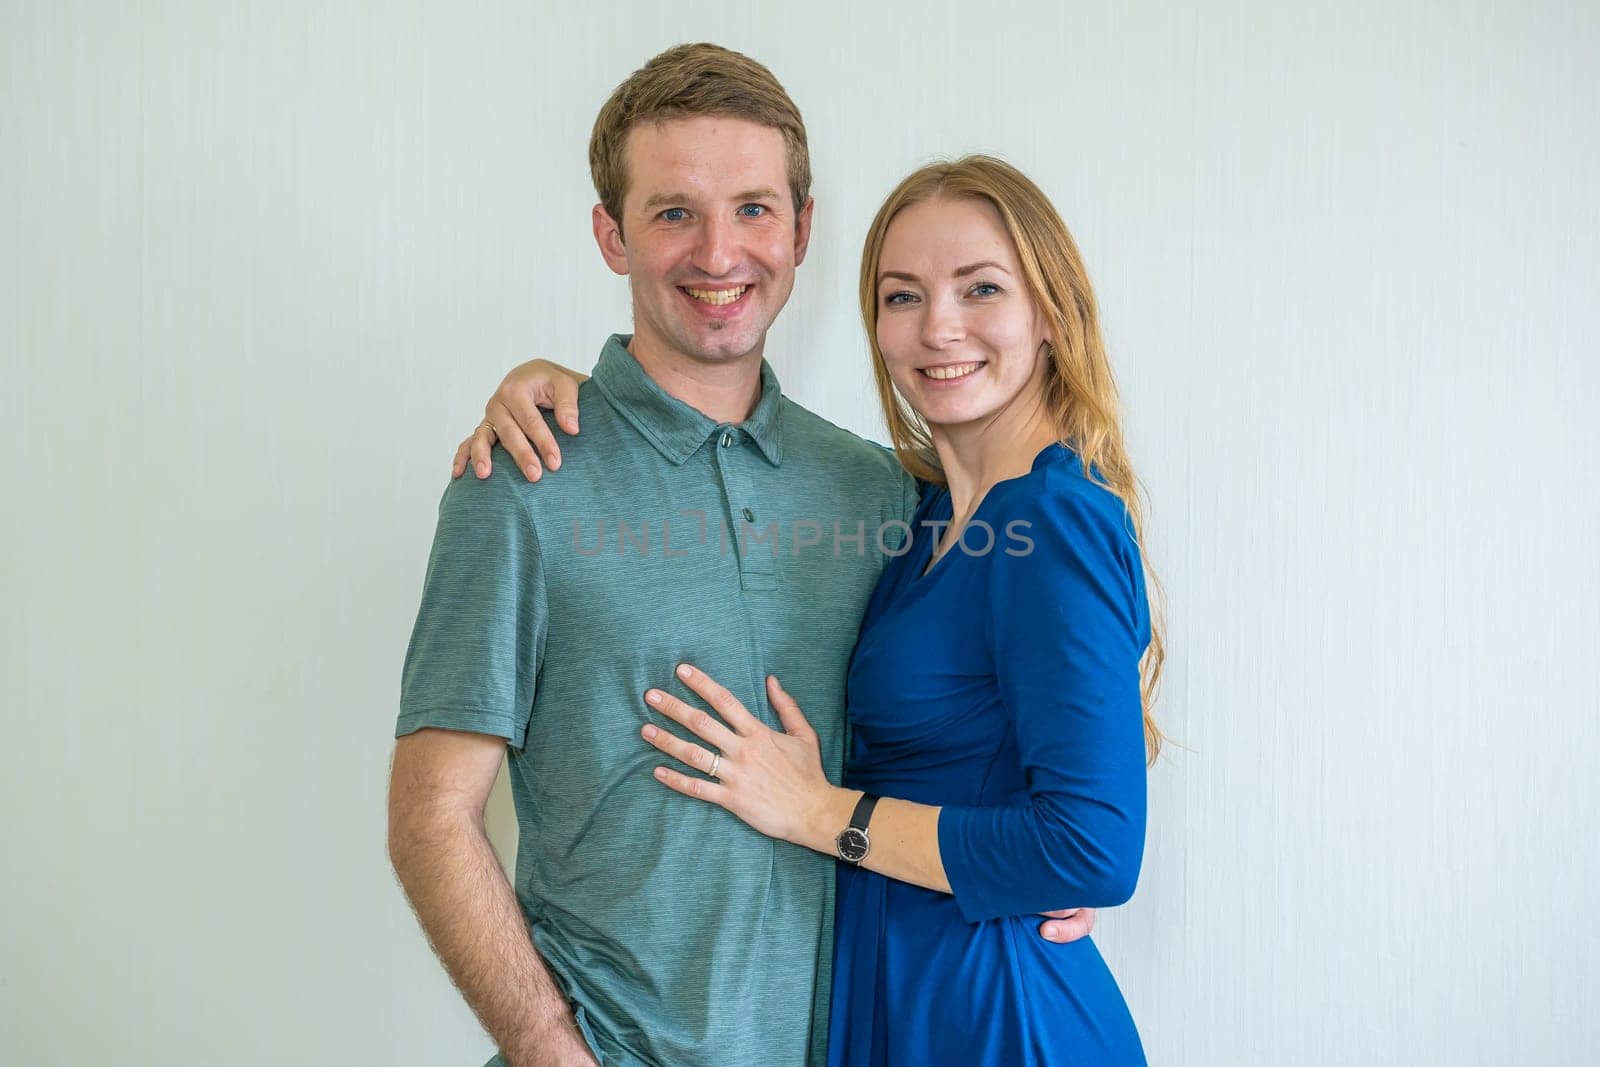 Portrait of happy young spouses at home